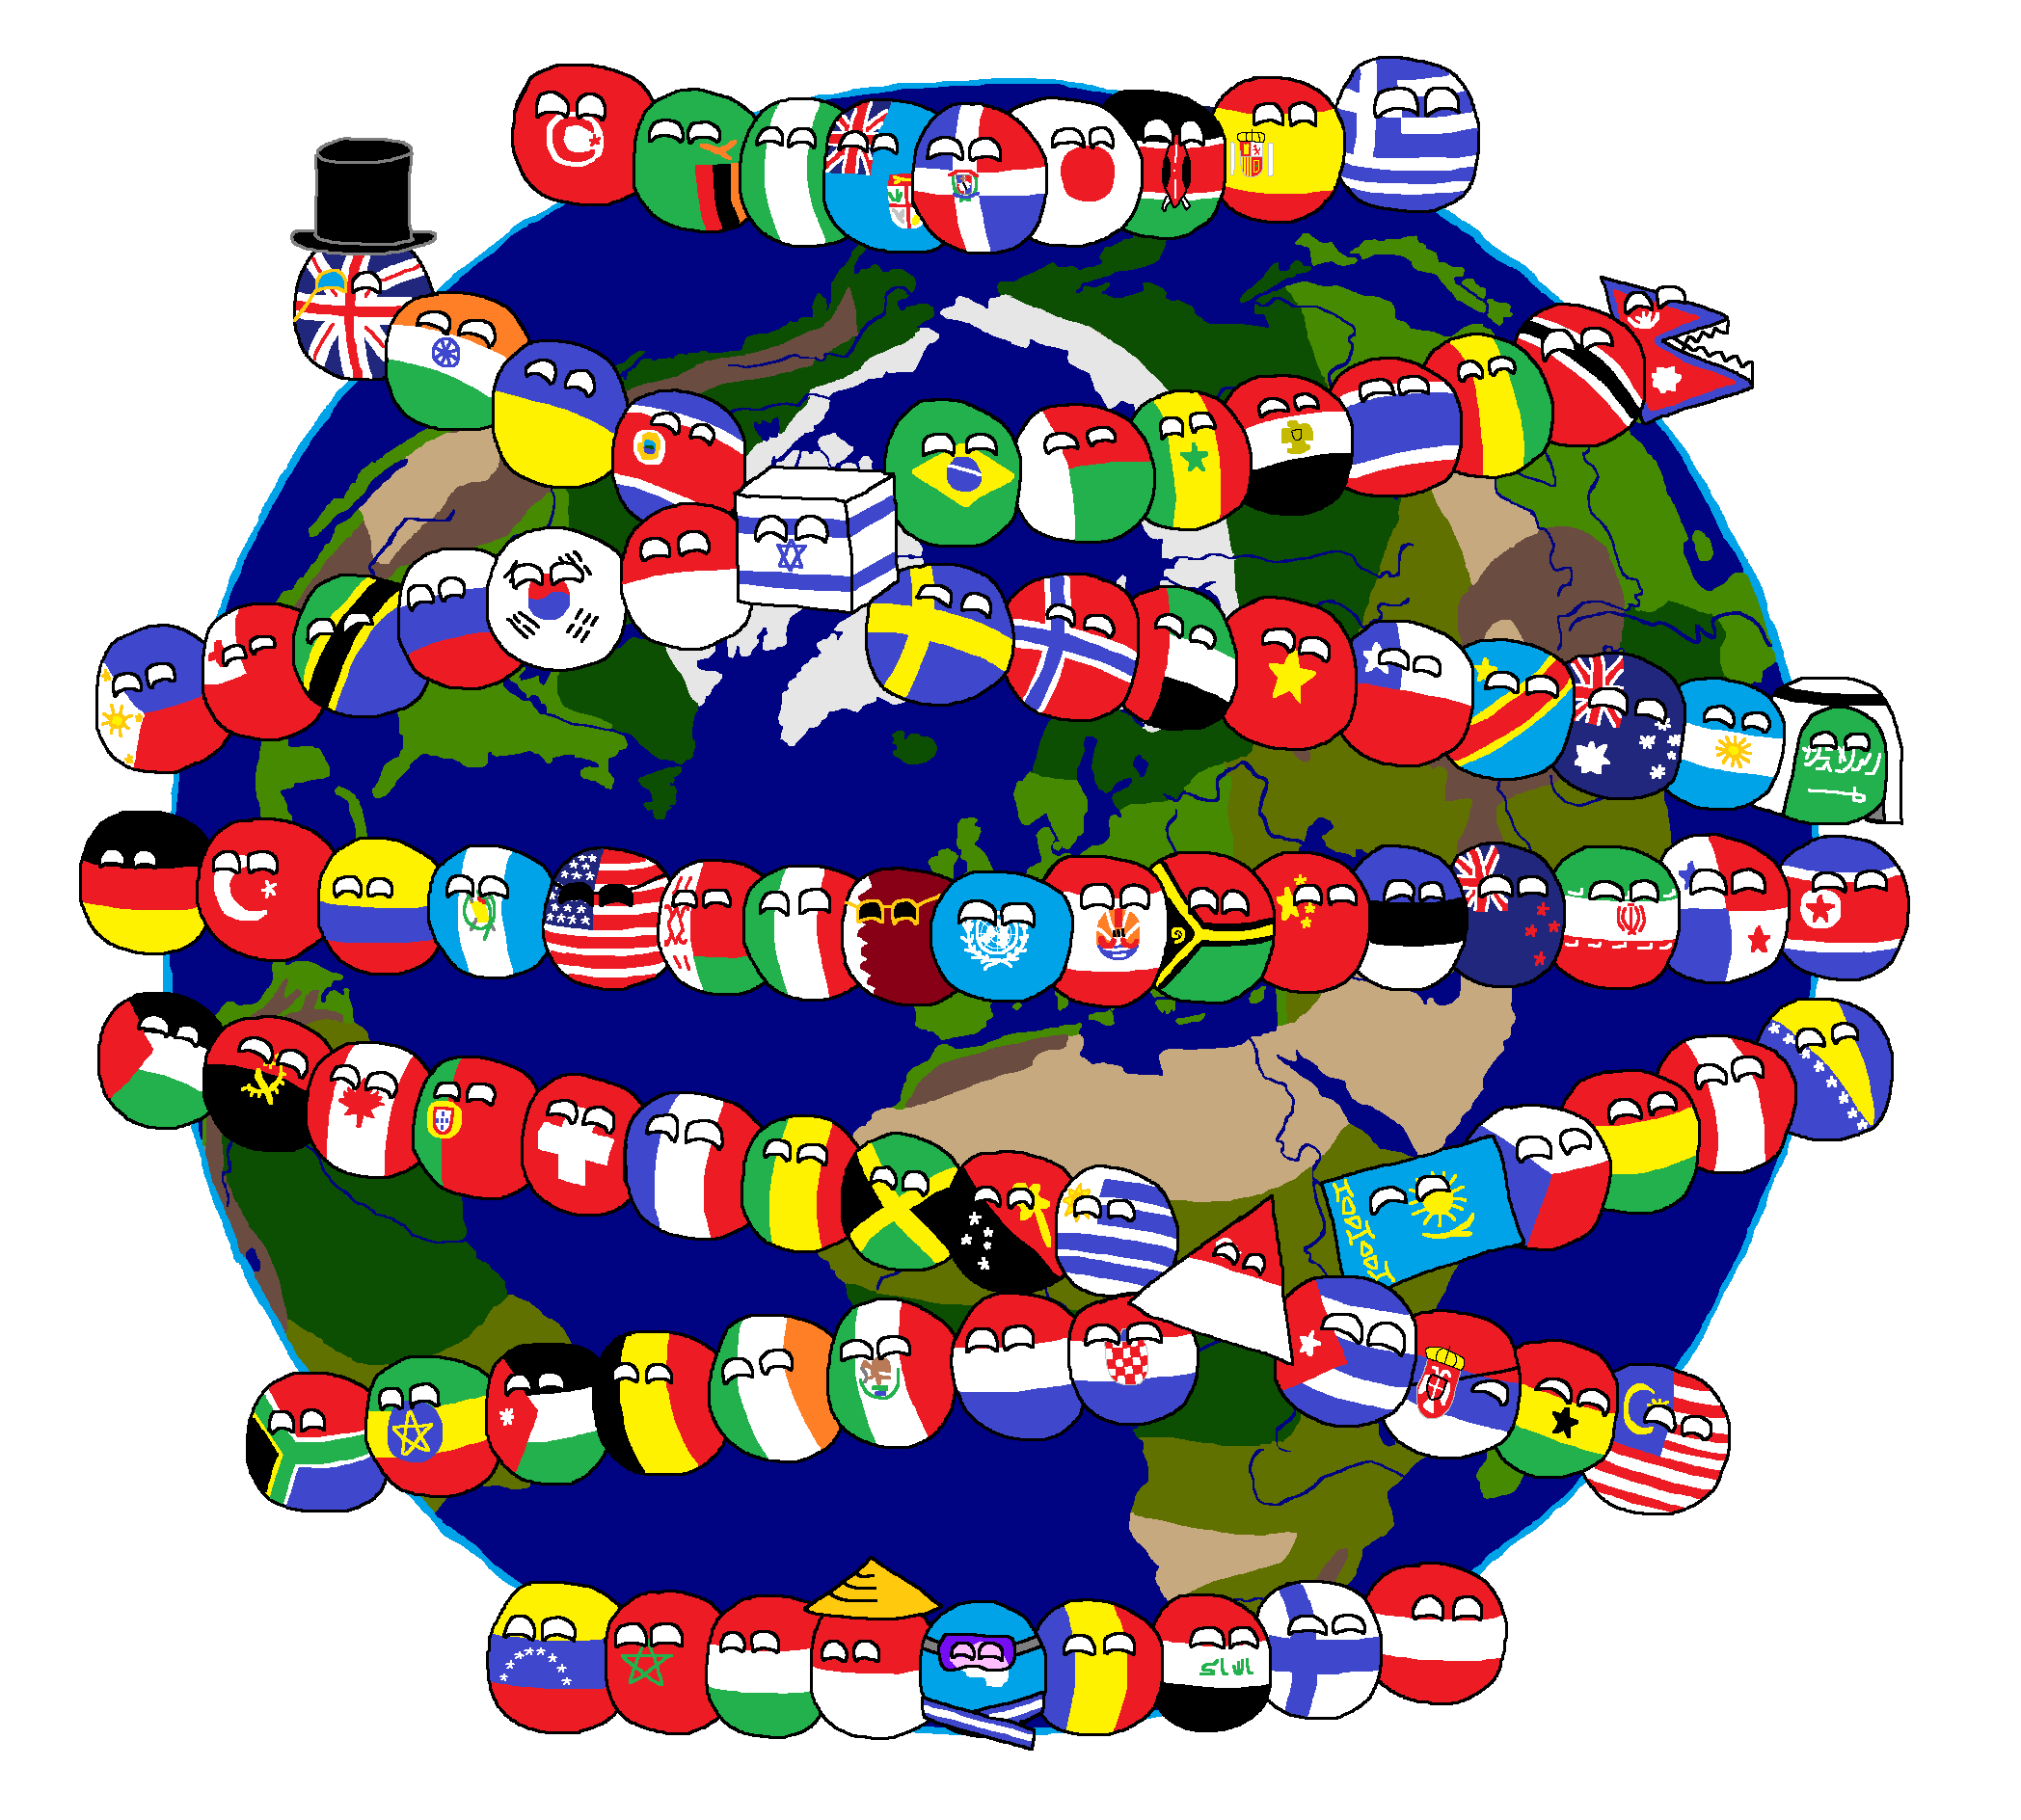 small balls covered in flags wrapping around image of the world